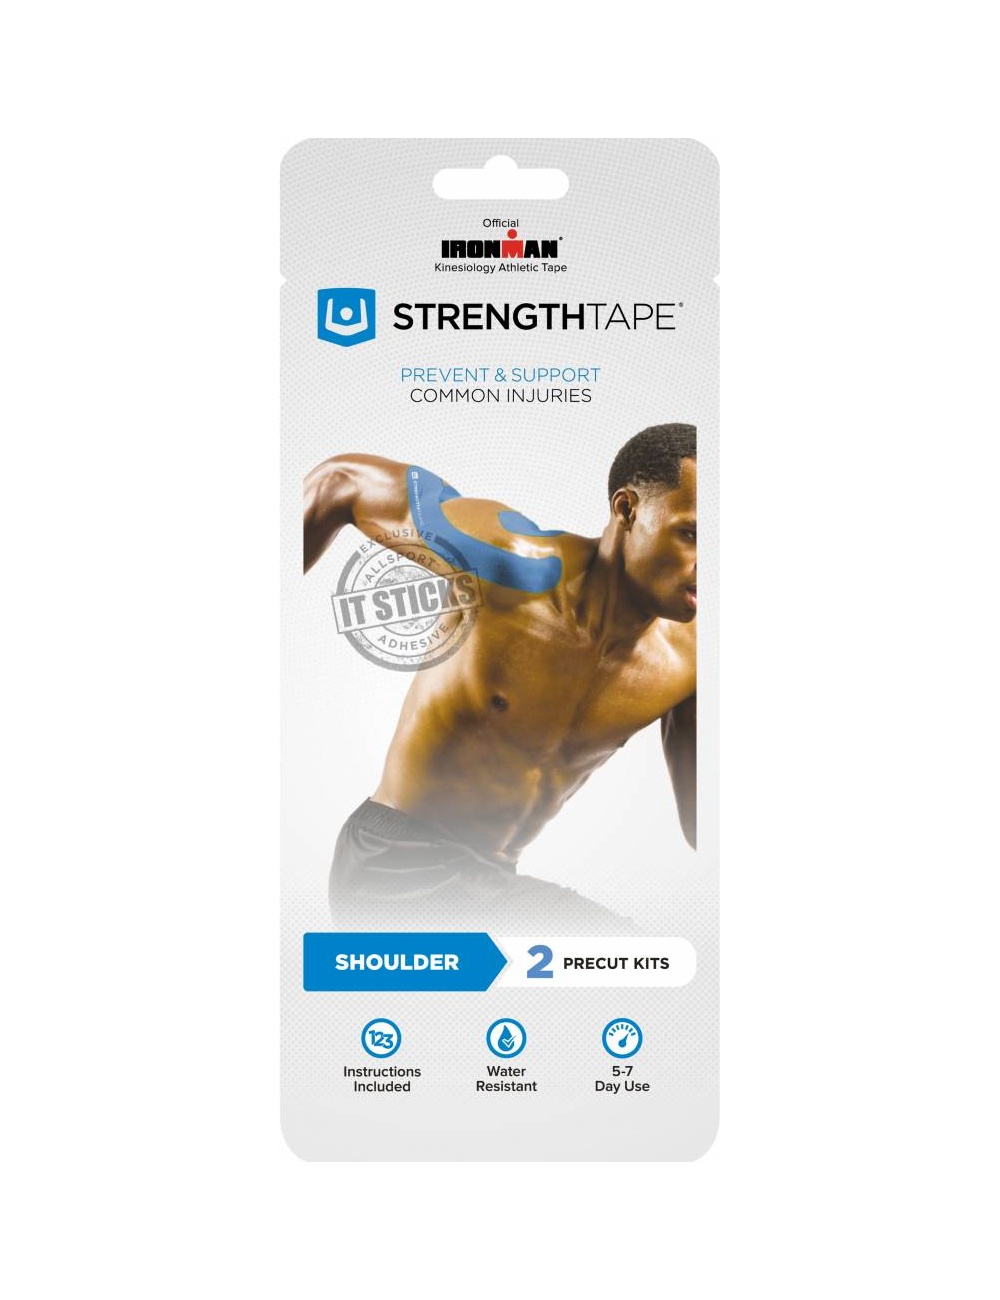 StrengthTape Kinesiology Taping Kit for Shoulder and Rotator Cuff